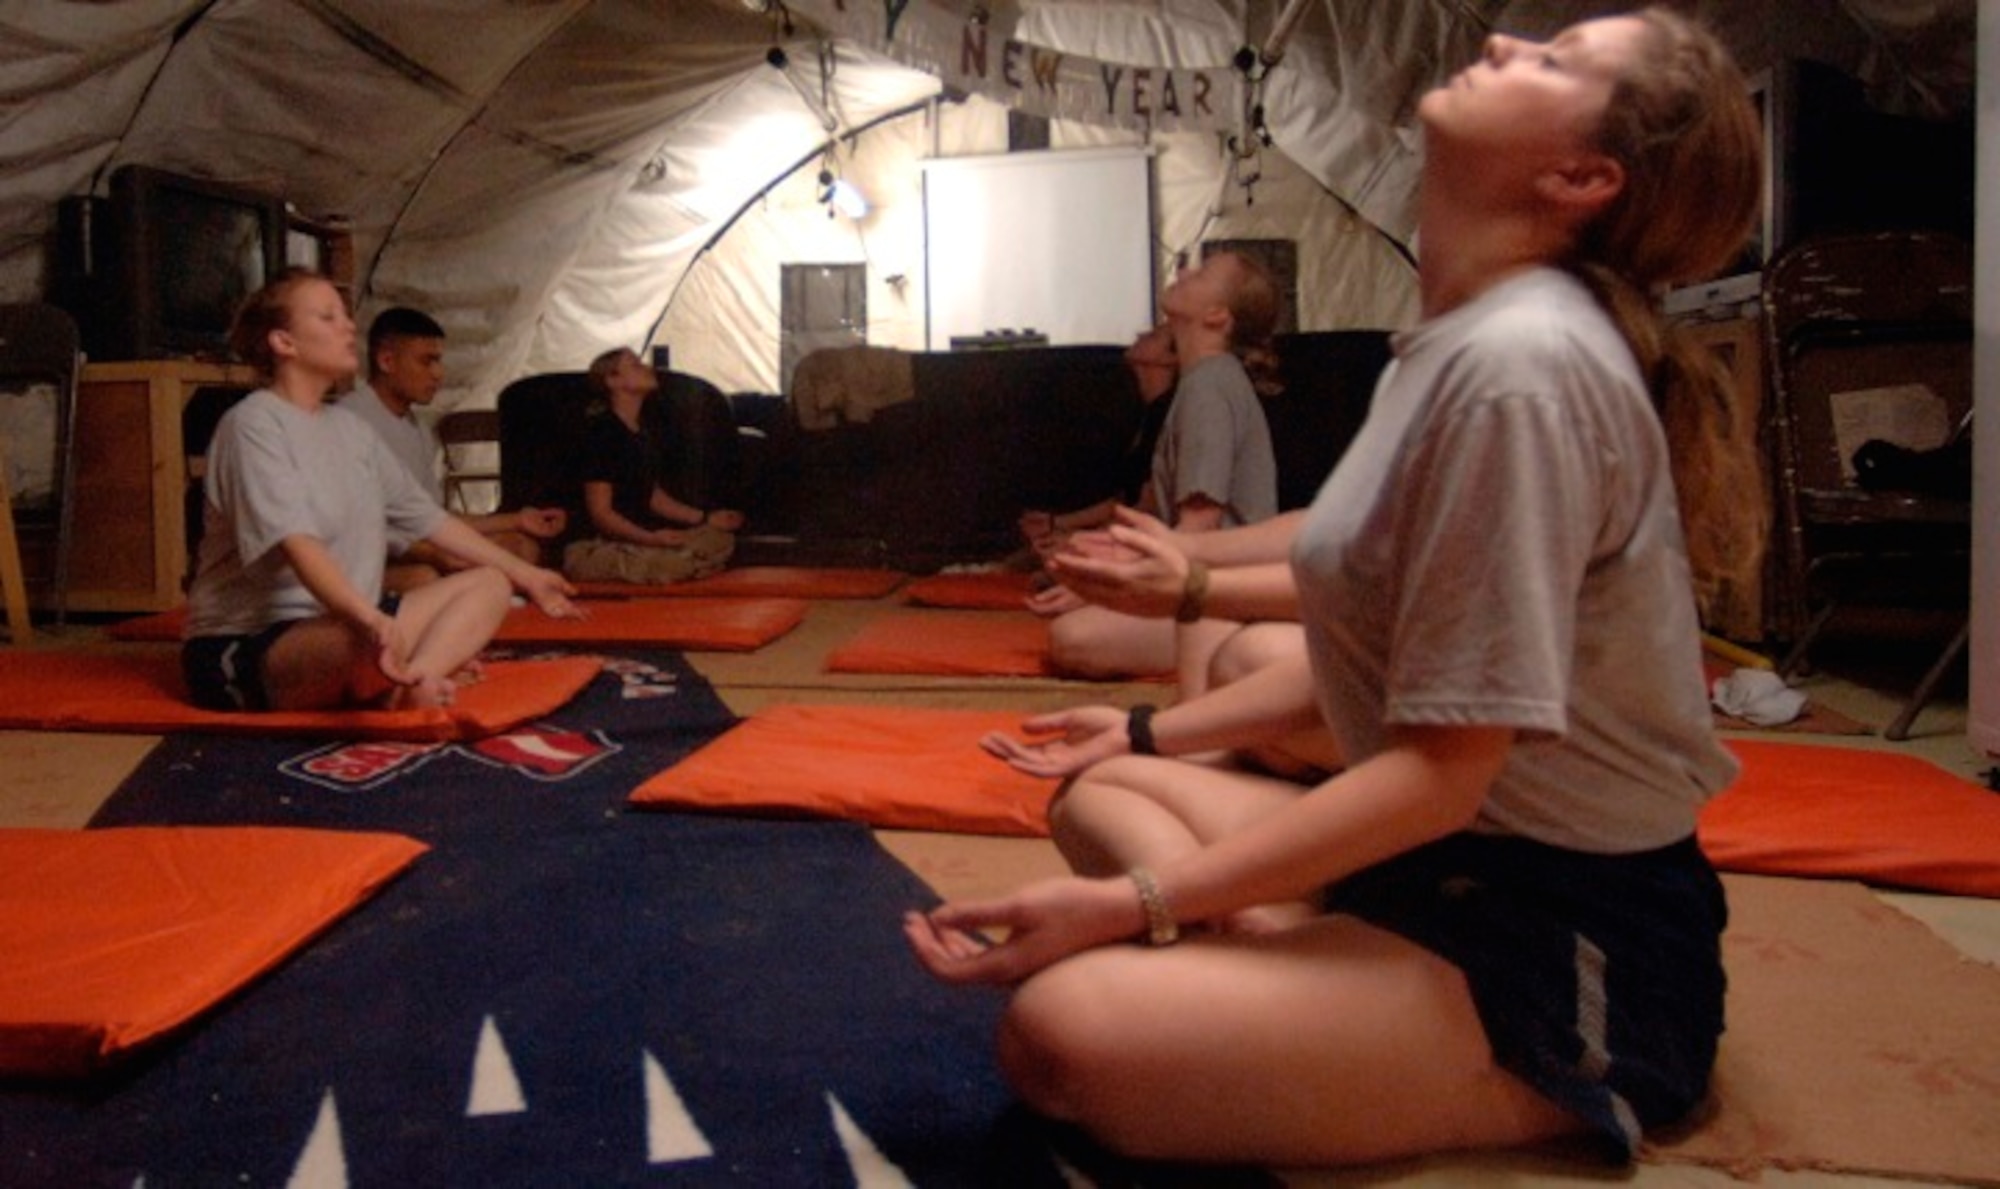 Airmen and Soldiers practice breathing and relaxation during their off duty time in a deployed location. Stress can take its toll on your mental and physical health, including your heart health, but there are breathing techniques to buffer yourself from it. (U.S. Air Force photo by Master Sgt. Lance Cheung)